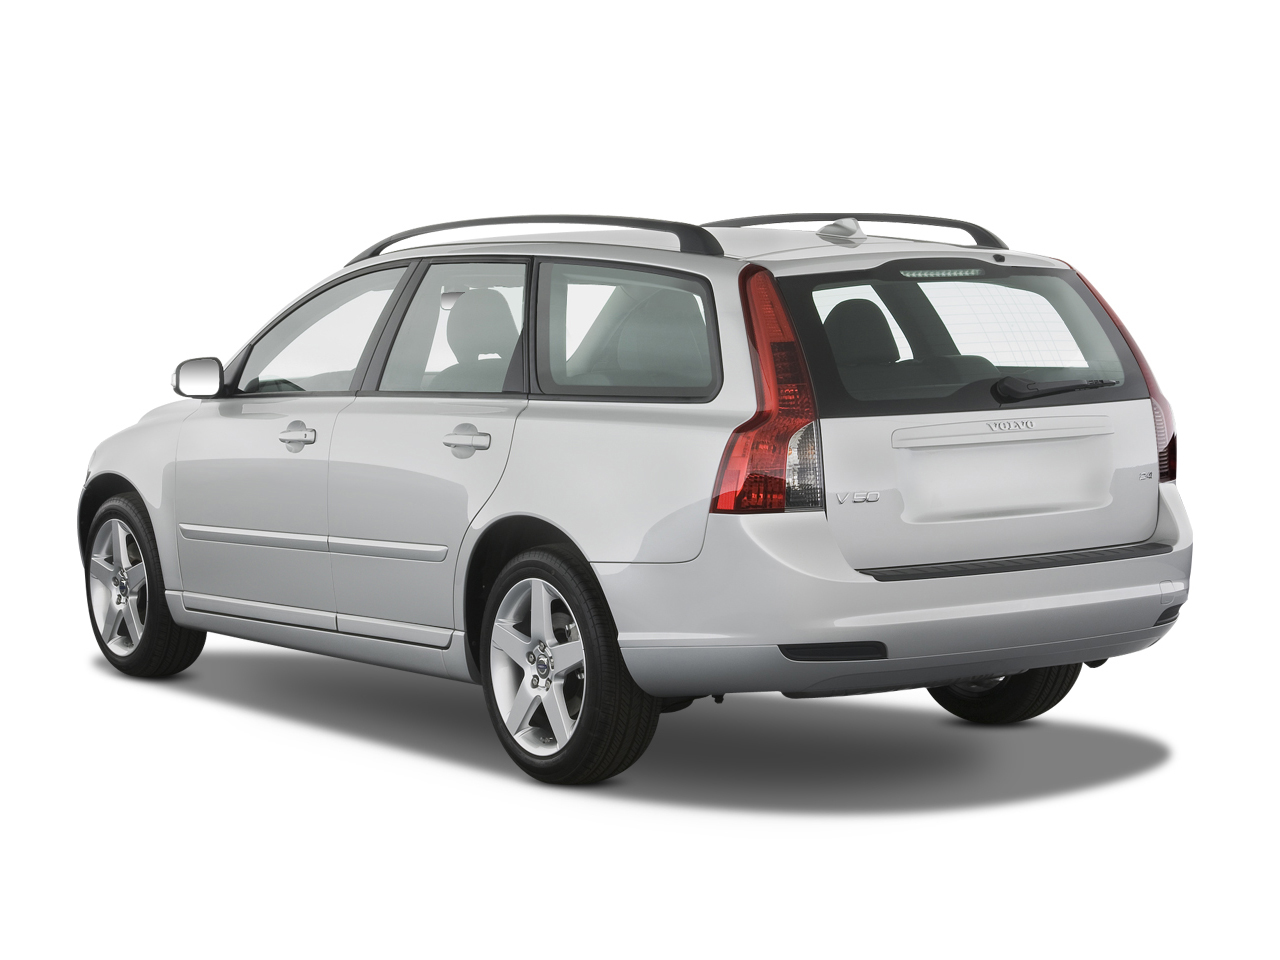 The roof rails come as standard on the Volvo V50 2.4i.